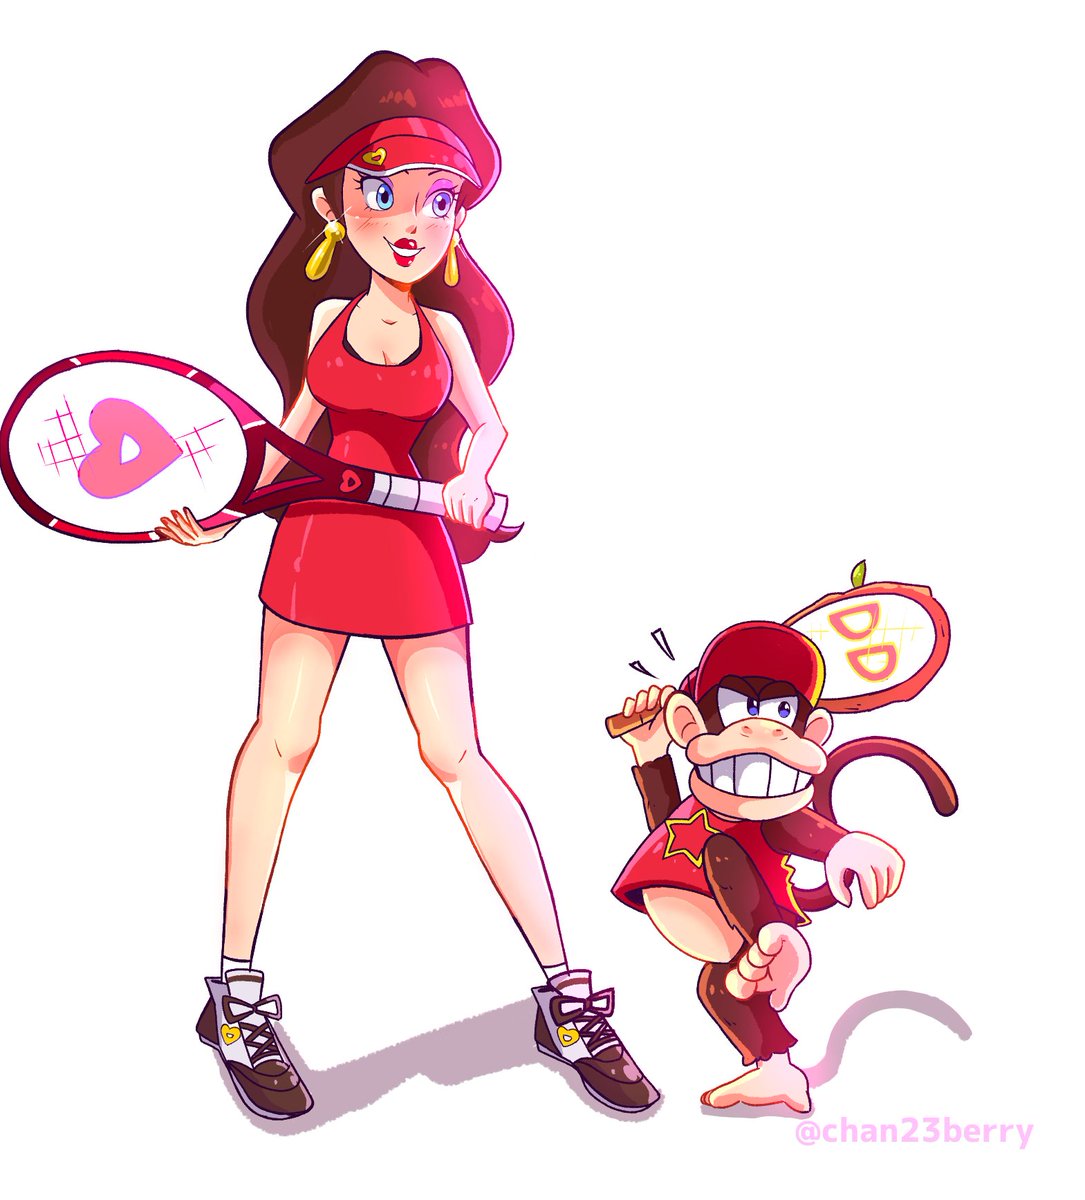 💋Pauline and Diddy Kong 💫

The mayor and famous singer of the new Donk accompanied by the charismatic Diddy 

A peculiar duo but I see them compatible Diddy is fun and Pauline extravagant 

(Next Tulip and kamek) 
#SuperMarioBros #Nintendo #Fanart #Pauline #diddykong #tennis